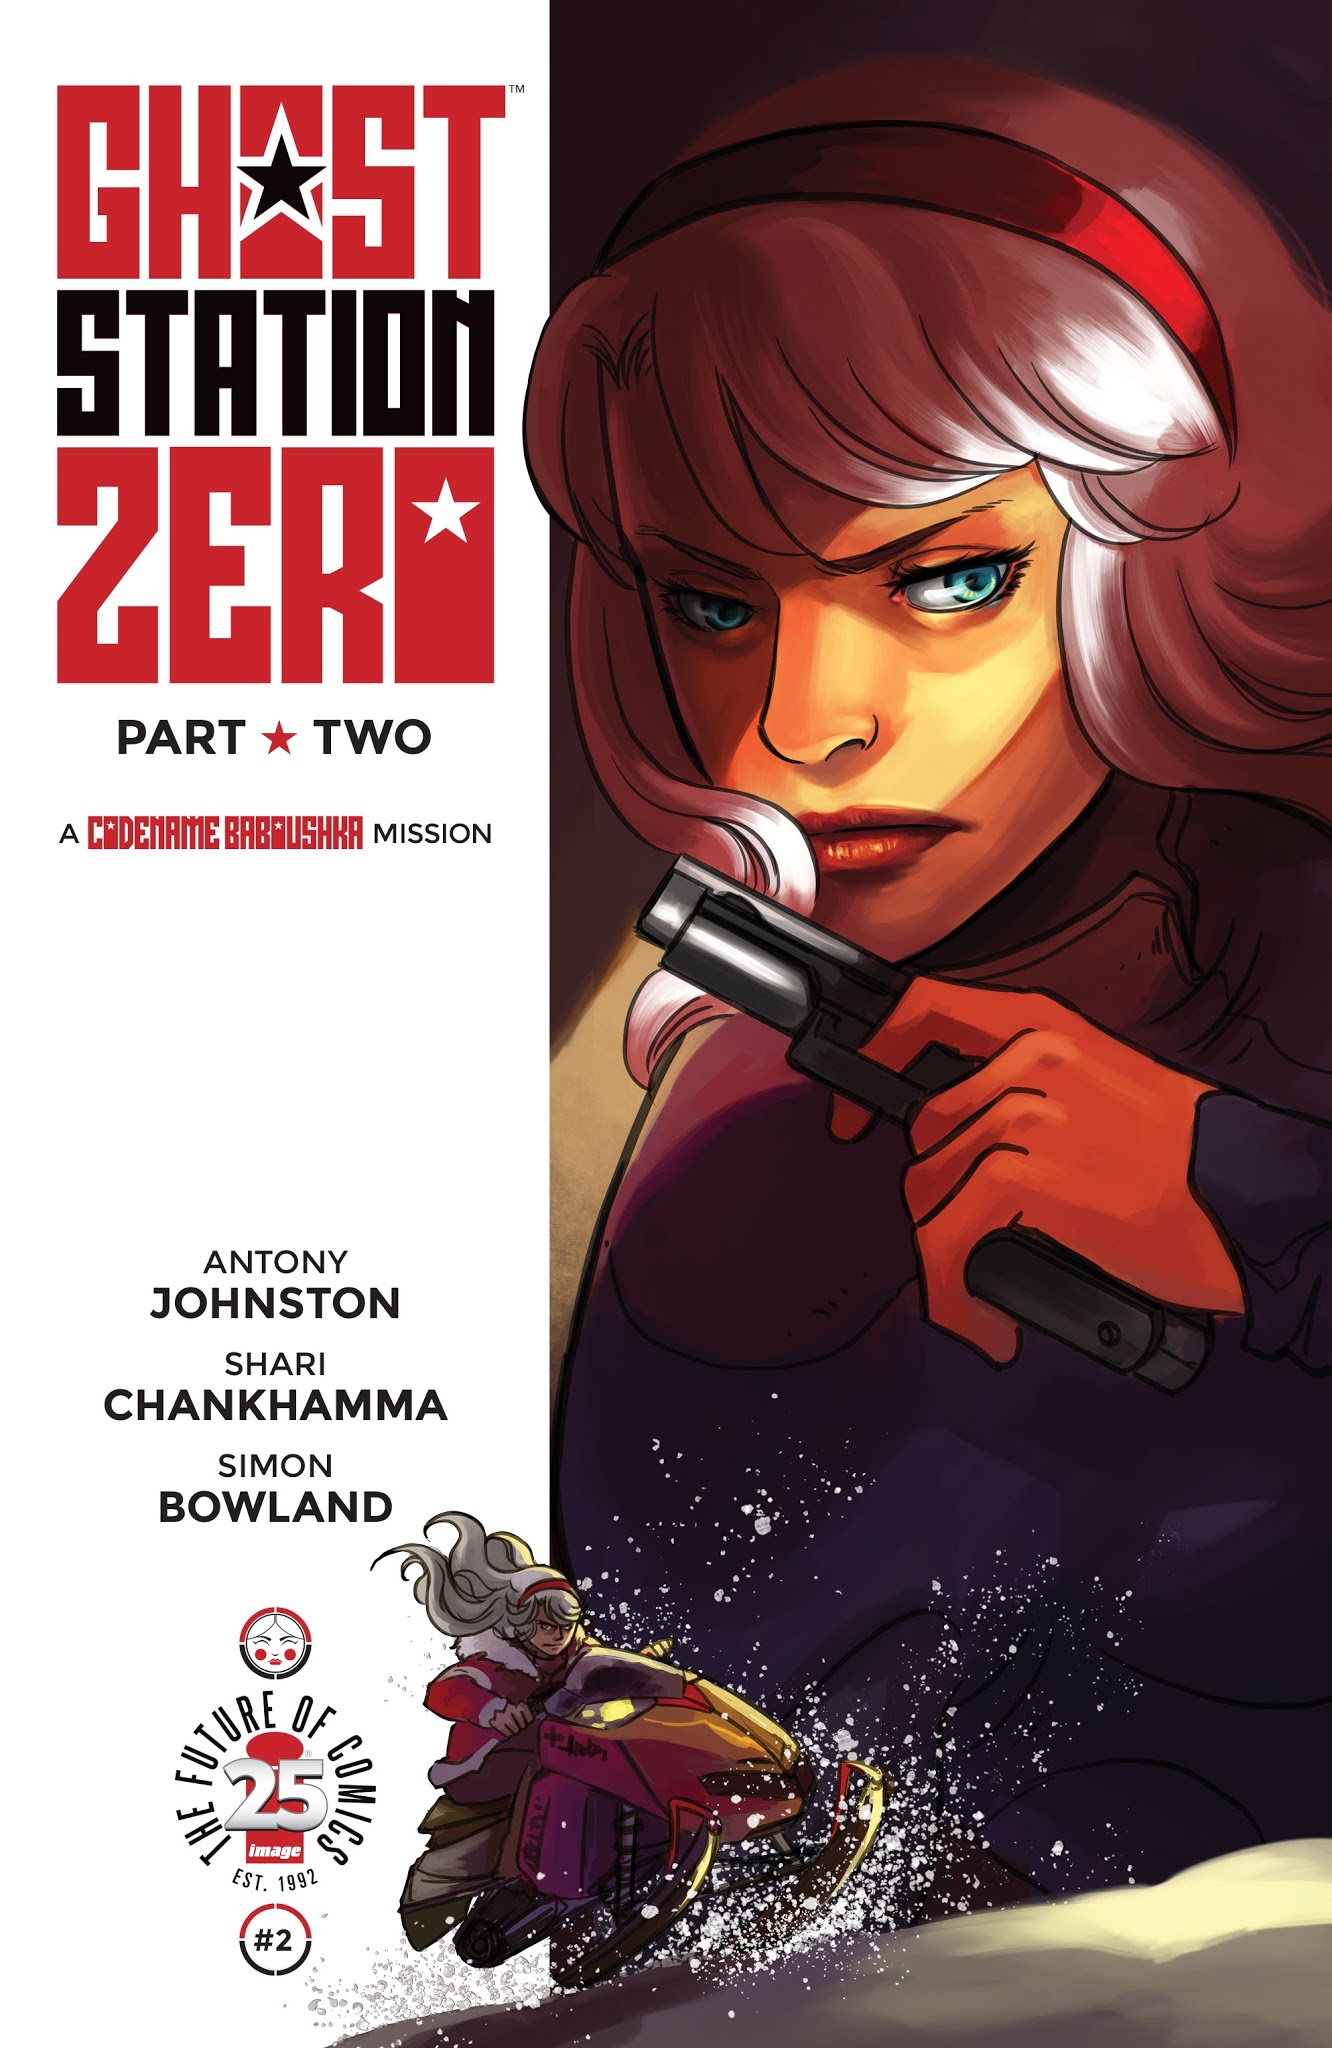 Read online Ghost Station Zero comic -  Issue #2 - 1